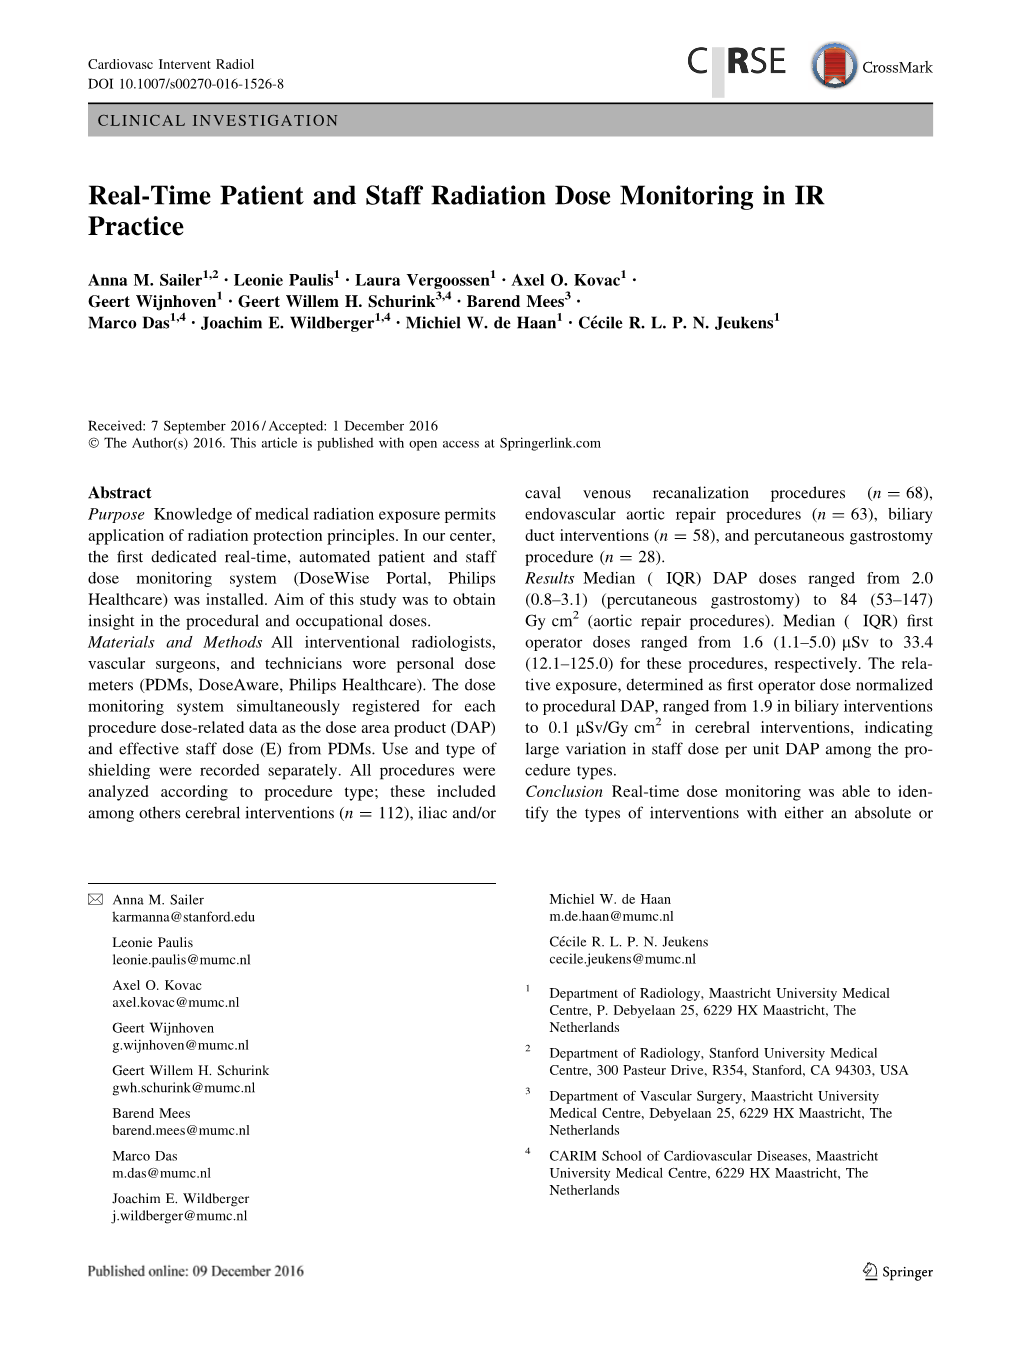 Real-Time Patient and Staff Radiation Dose Monitoring in IR Practice